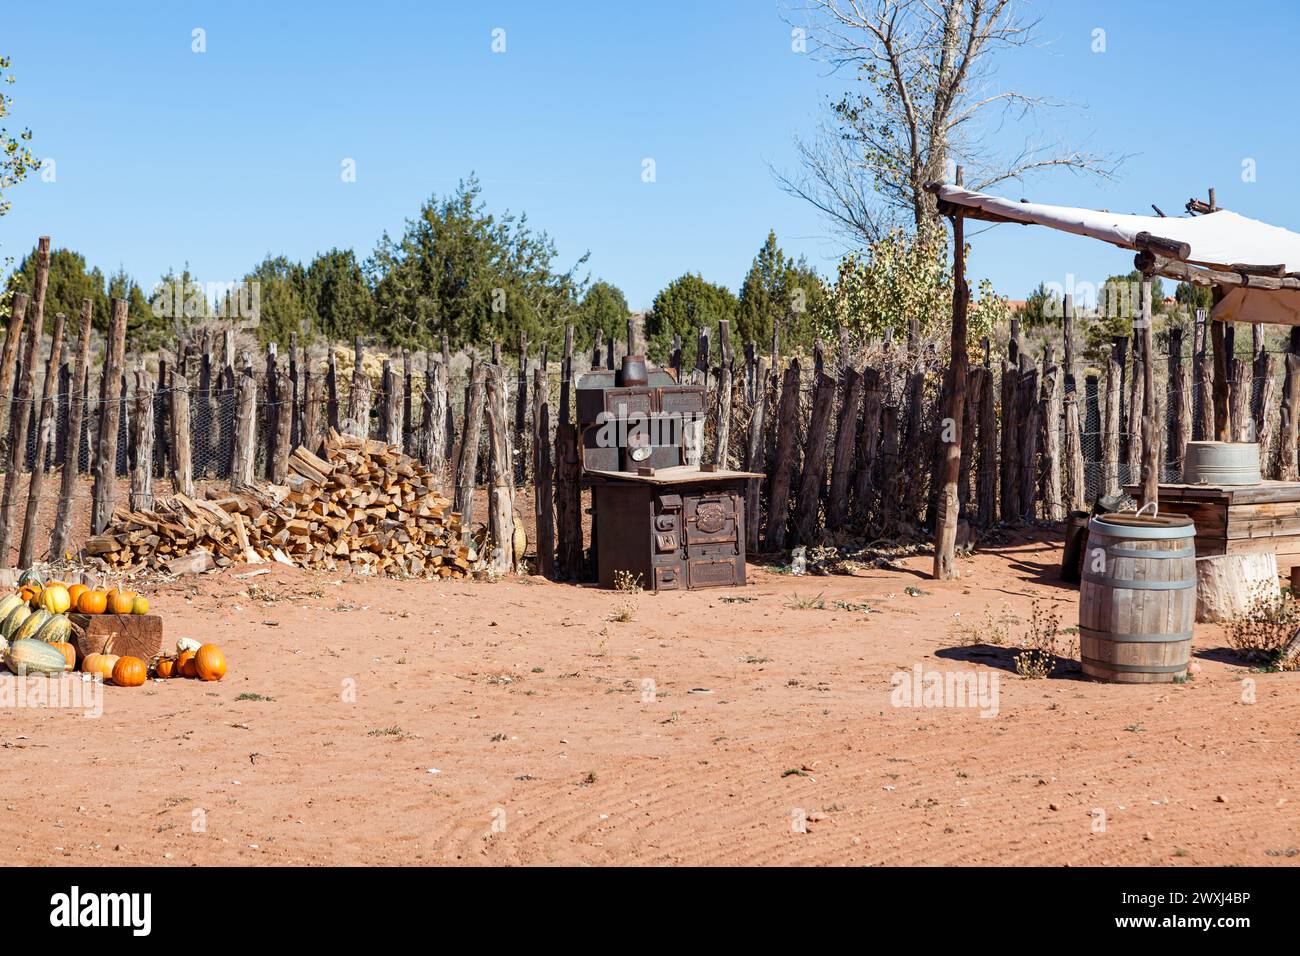 An old rusty cook stove and a stack of wood are featured in a display of nineteenth century living at Pipe Springs National Monument in Arizona. Stock Photo